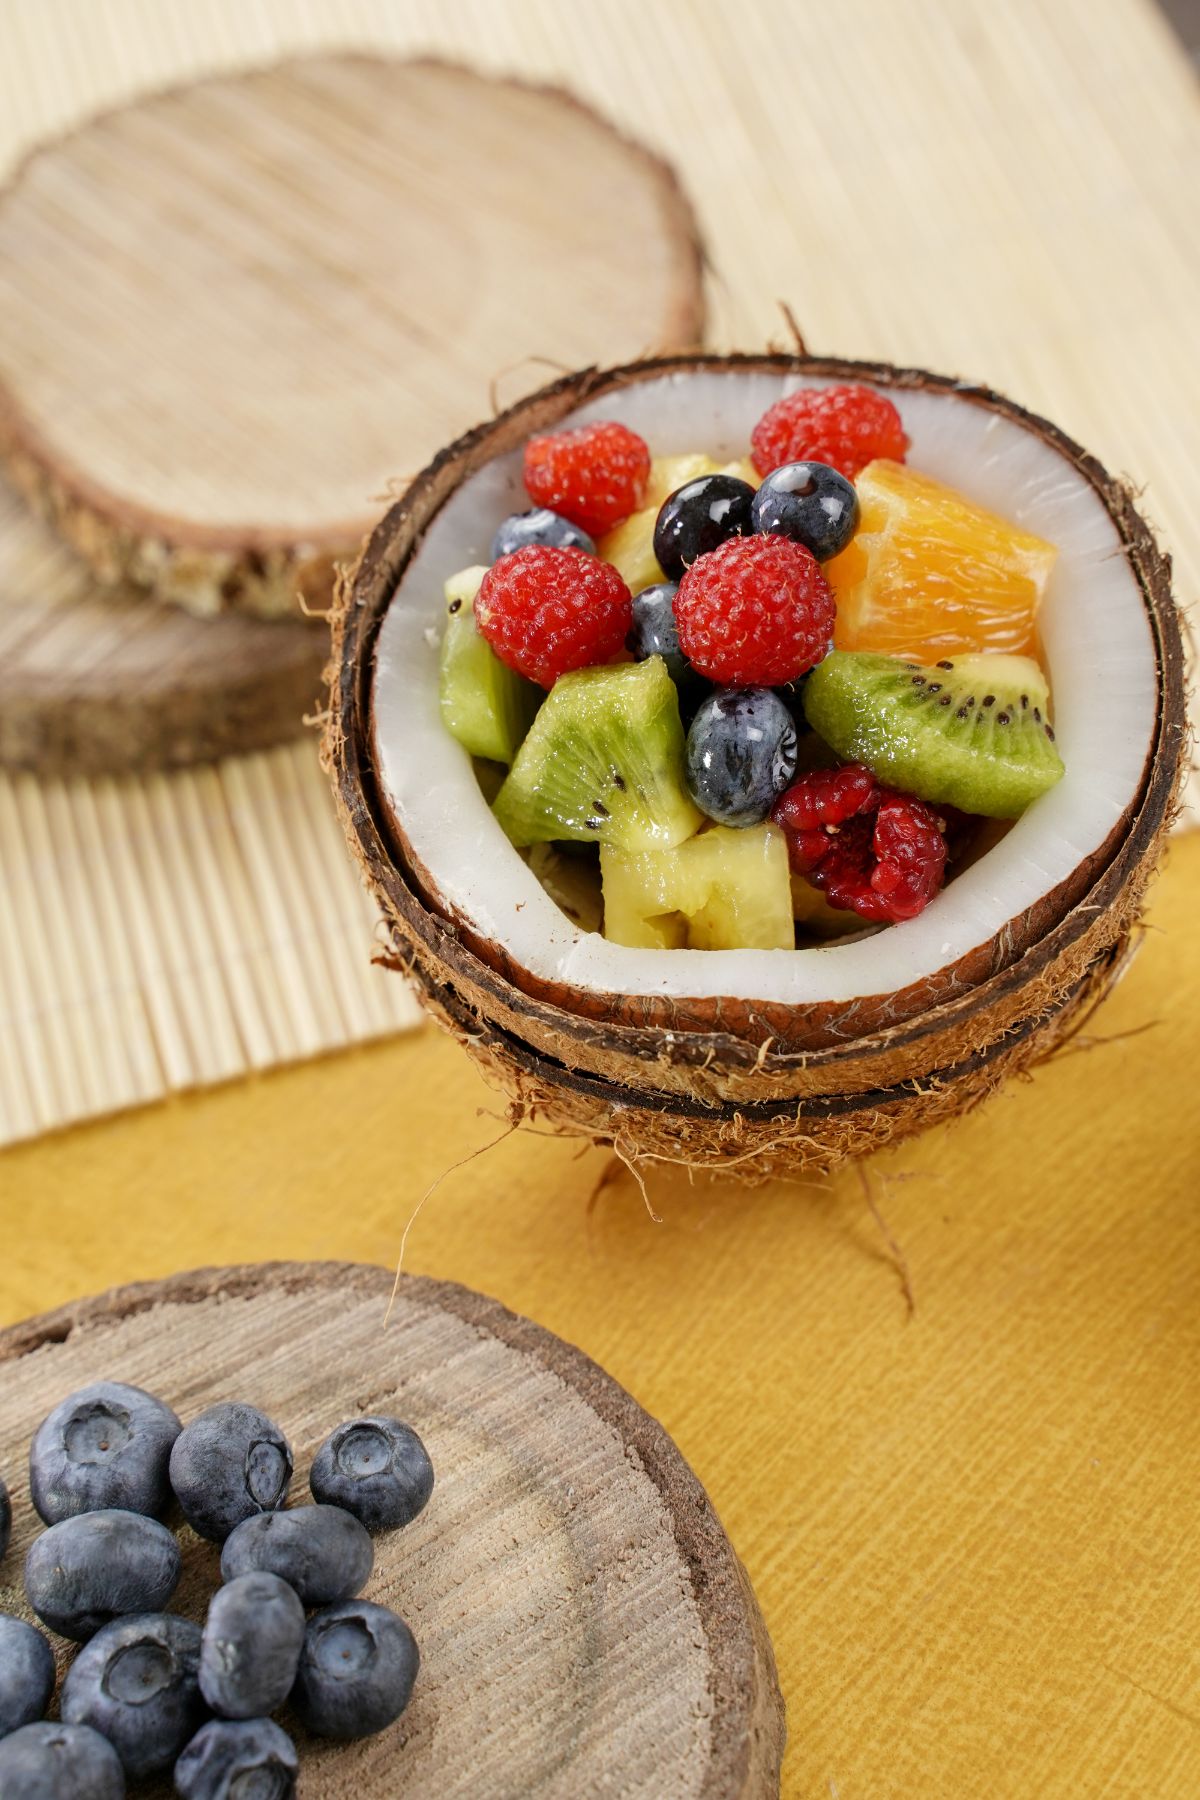 Rainbow Fruit Salad with Honey Dressing served in a coconut with some fresh blueberries